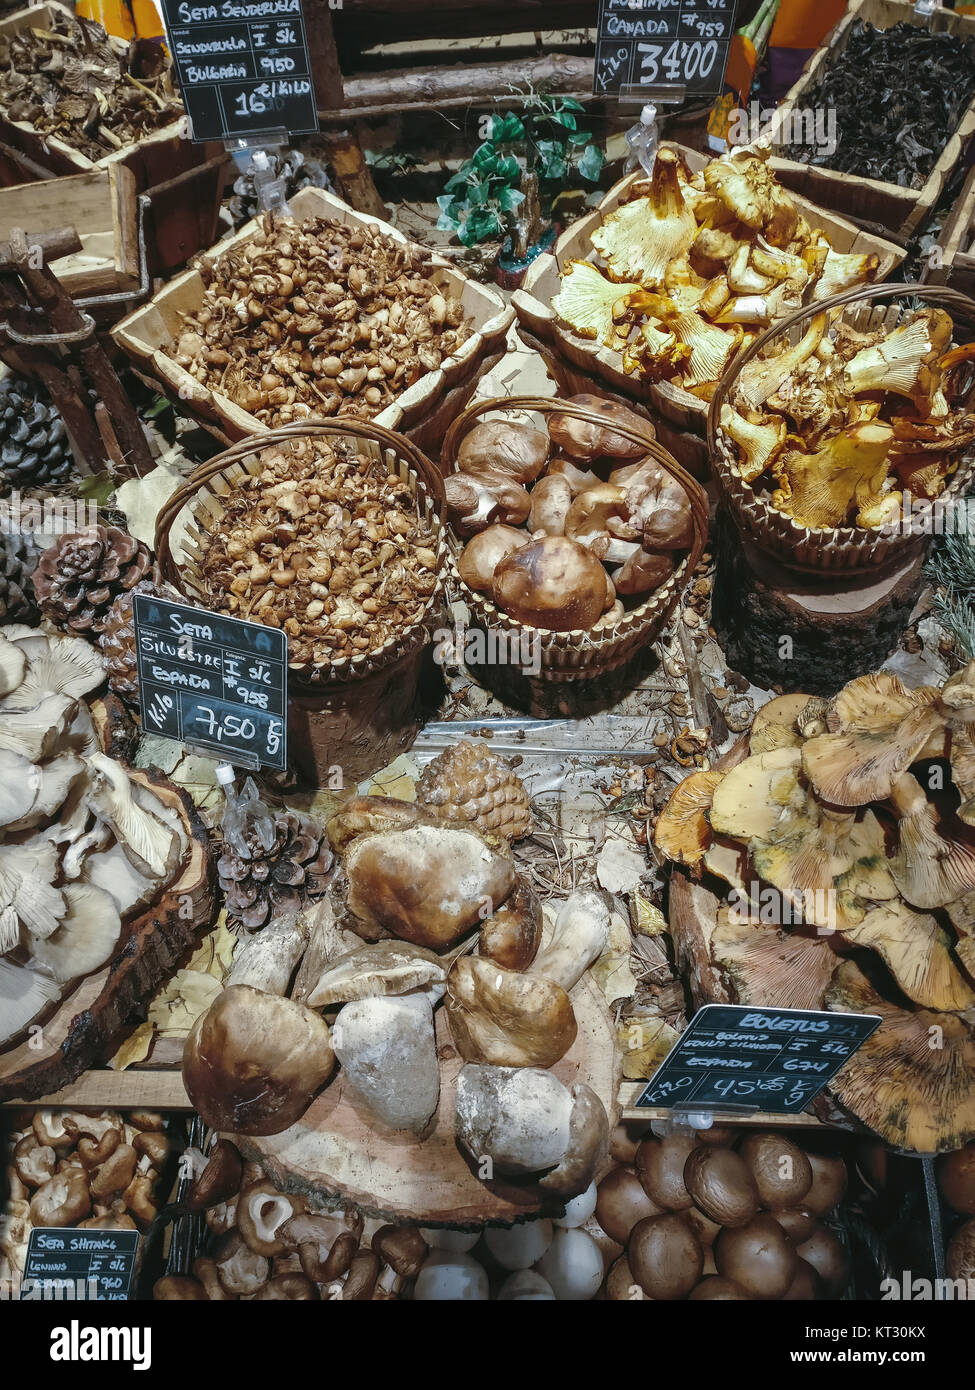 Many different edible mushrooms in baskets on food market. Gourmet food. Autumn Mushrooms. Stock Photo